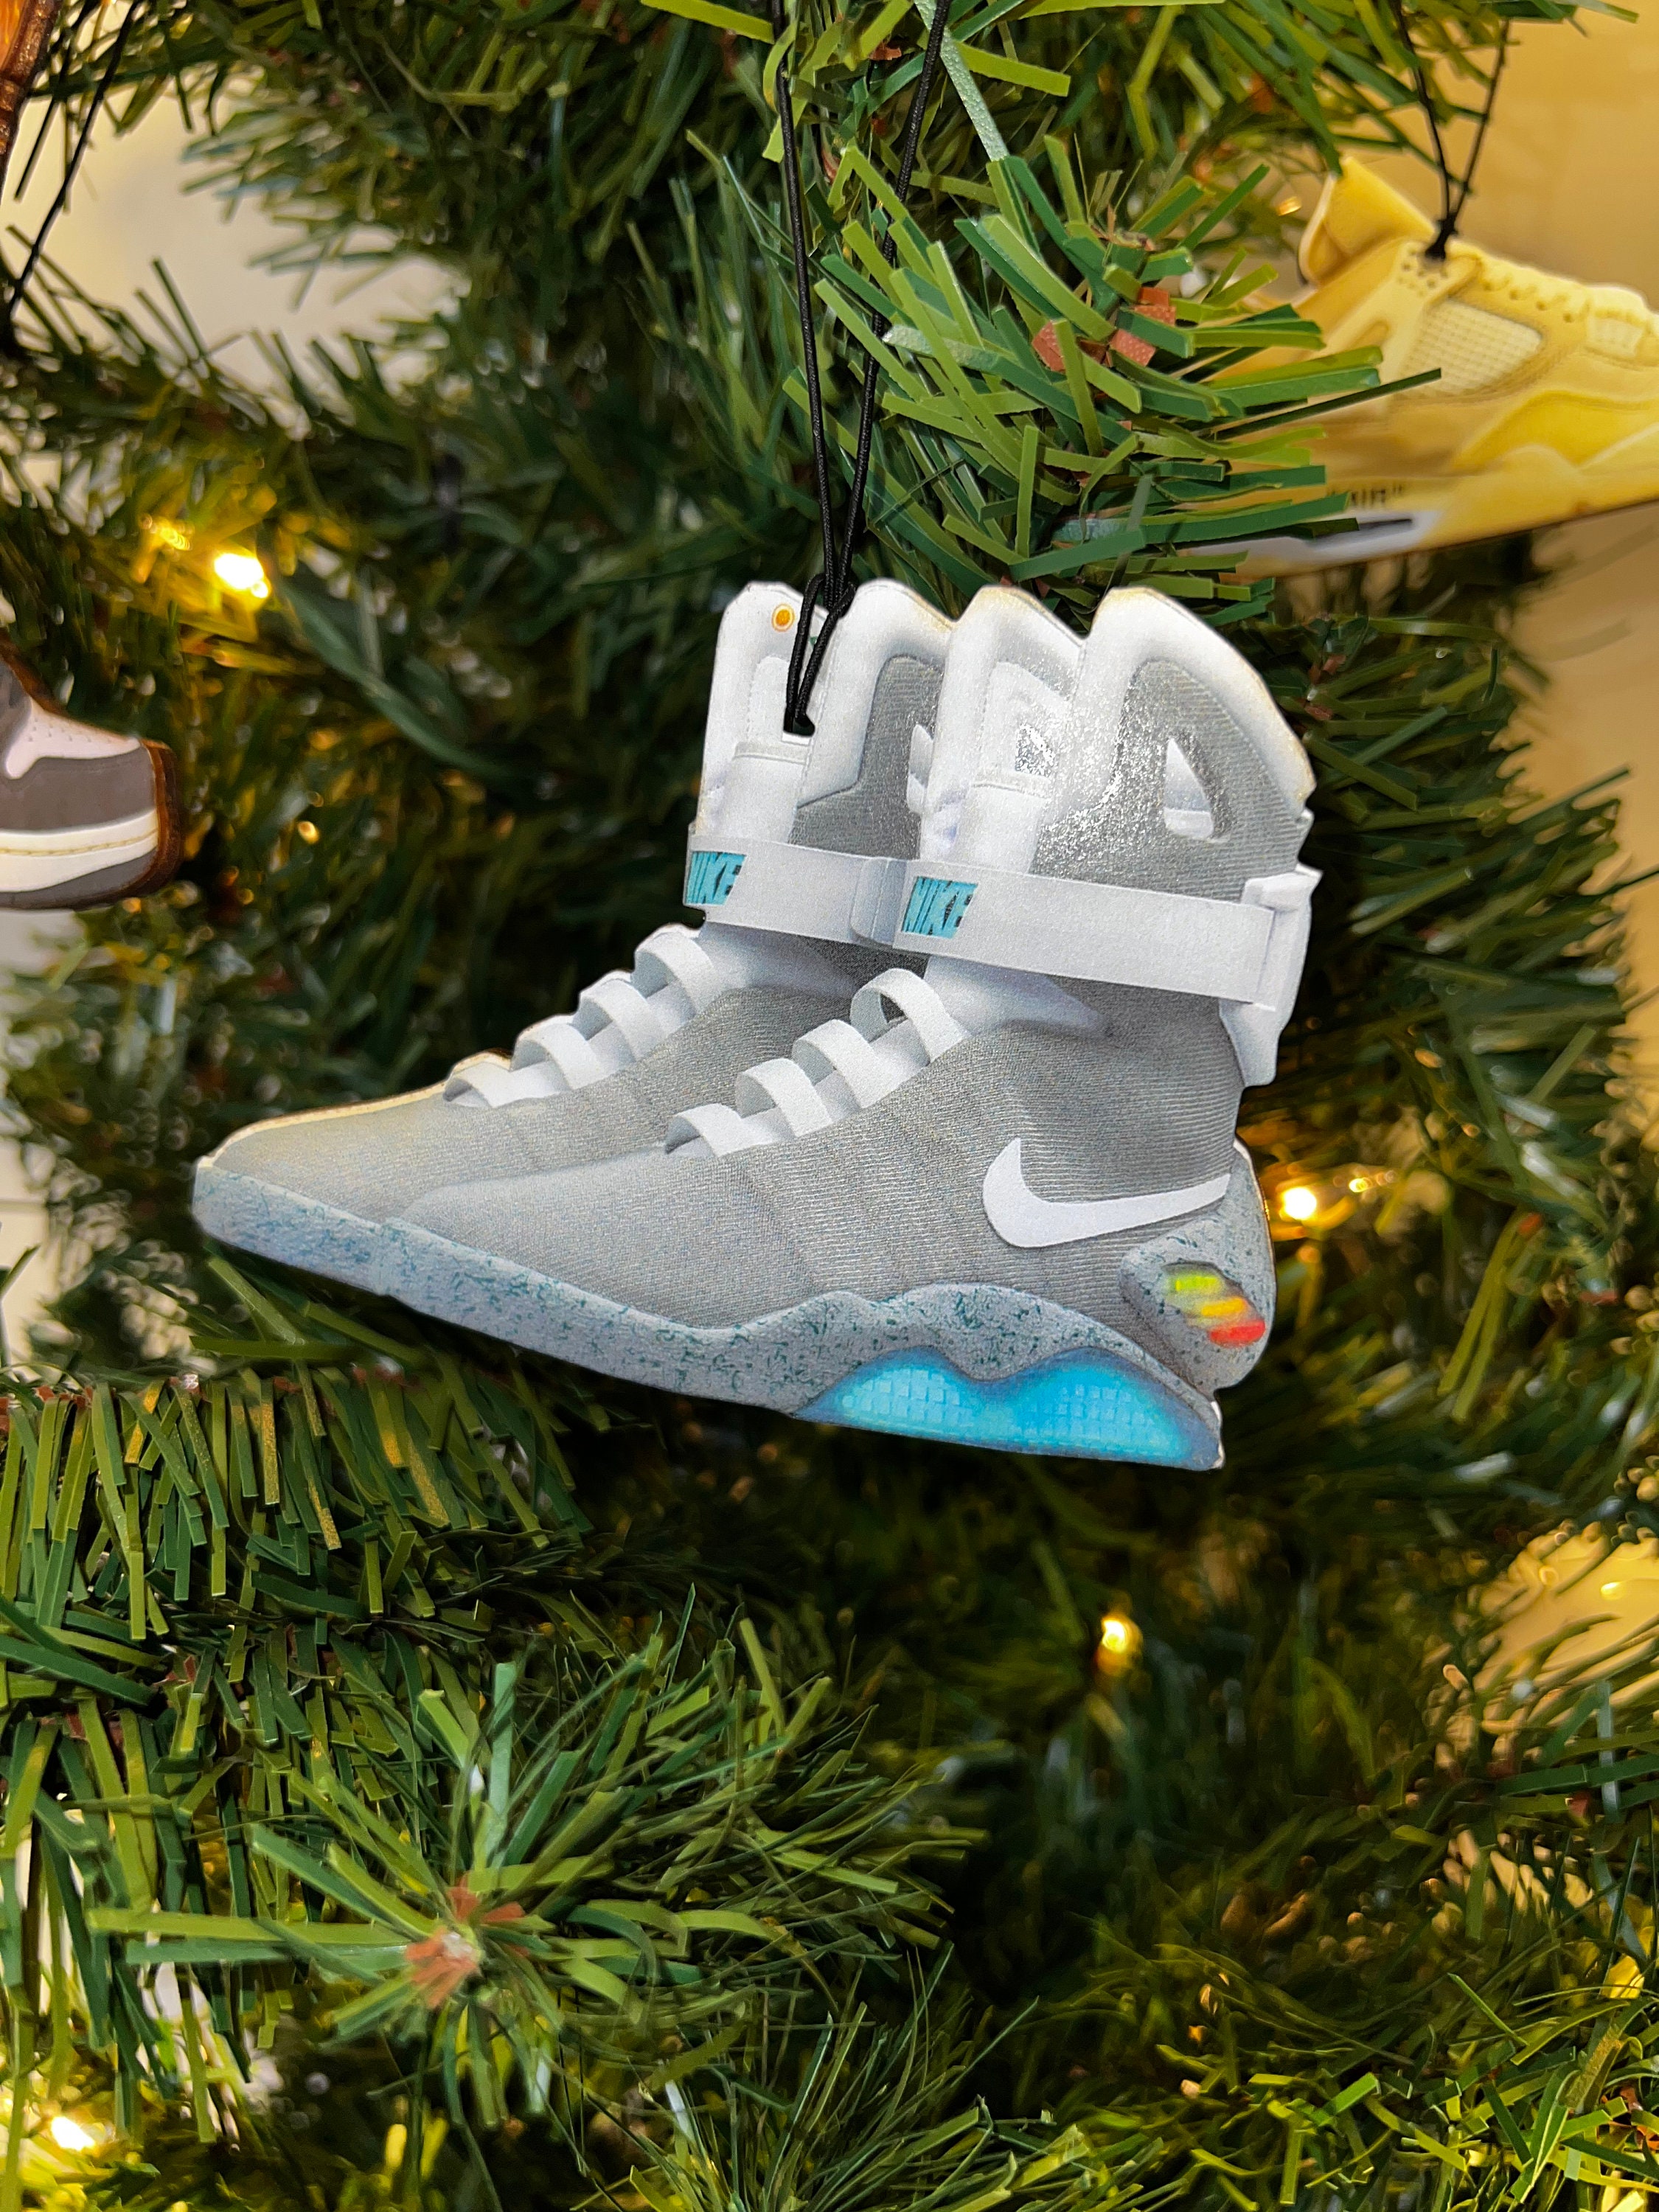 Kan worden genegeerd band raket Nike Back to the Future Air Mag Sneaker Christmas Ornament - Etsy